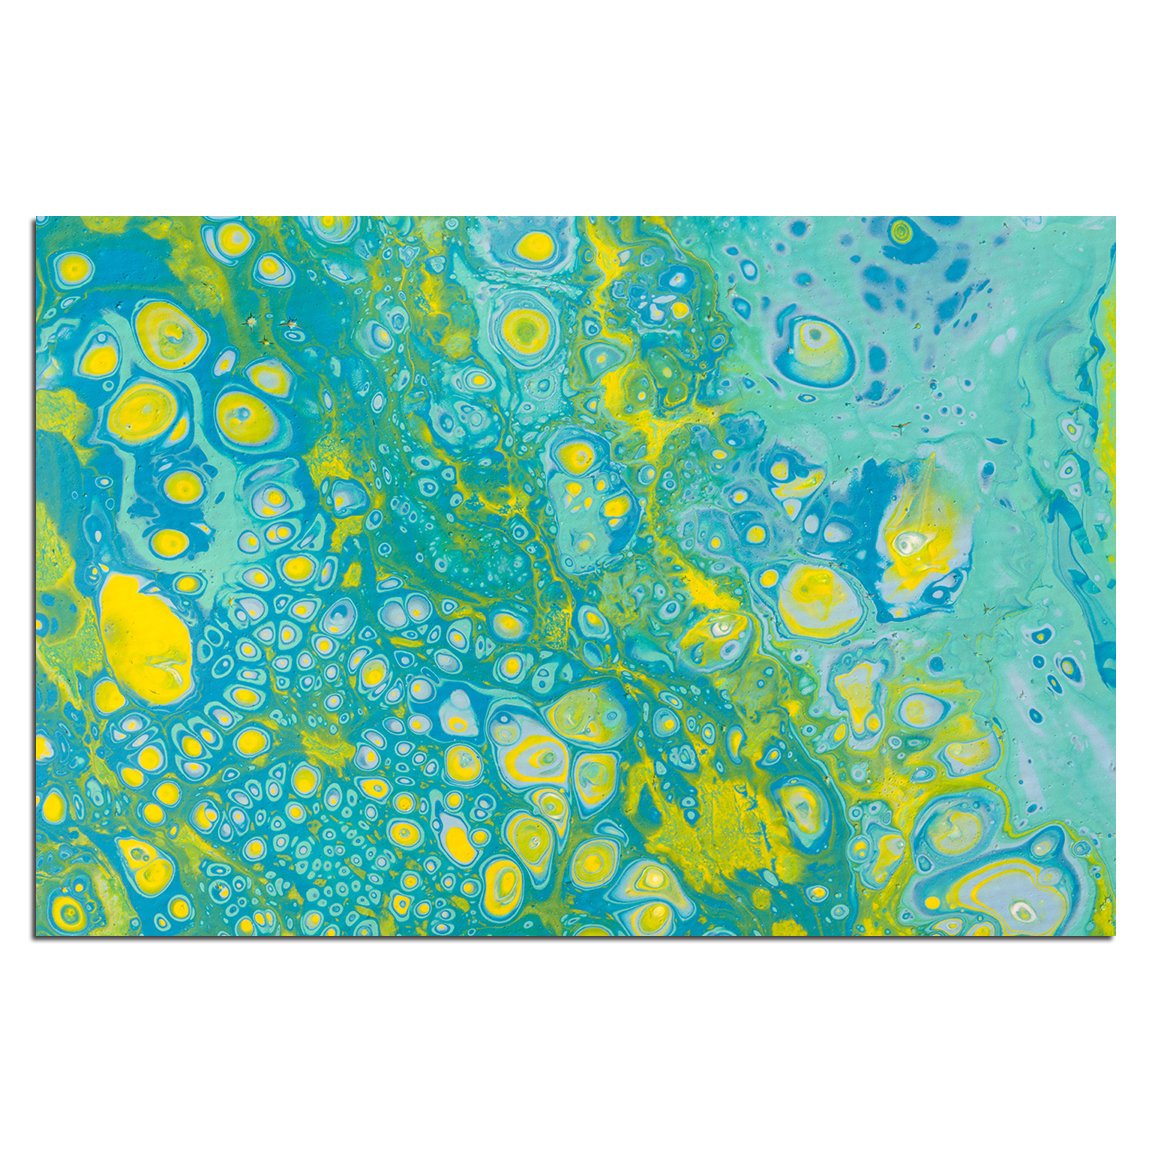 Removable Wall Mural - Wallpaper  Abstract Artwork - Fluid Art Pour 35  - PIPAFINEART